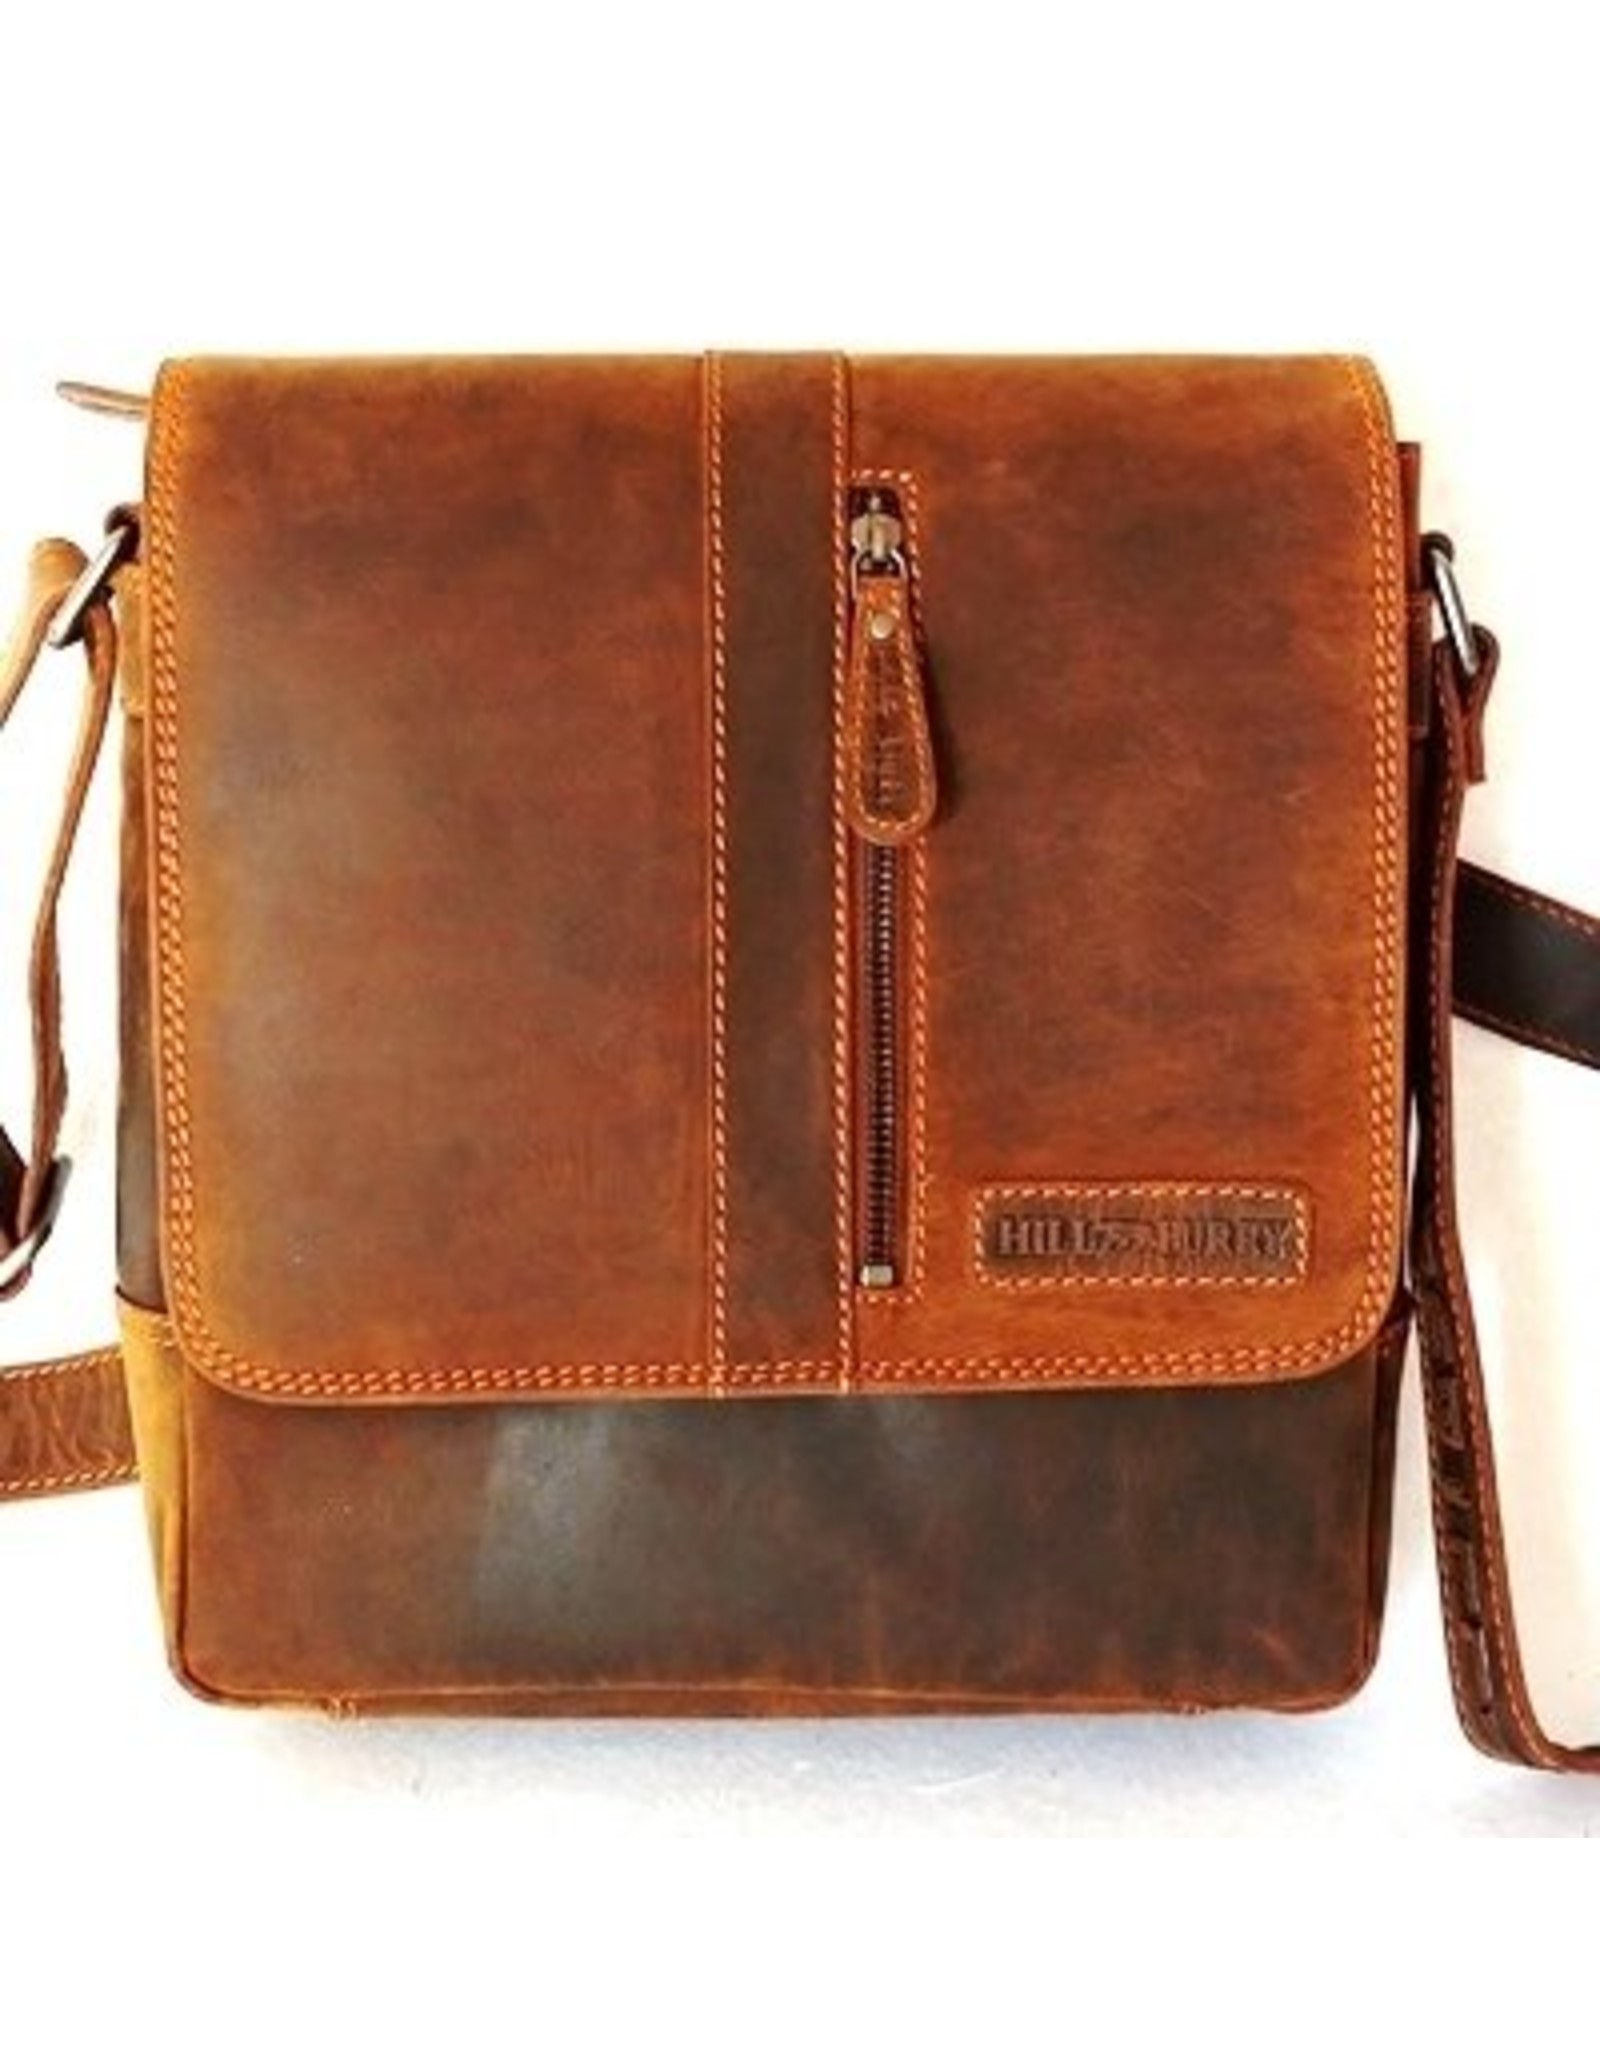 HillBurry Leather bags - Hillburry leather shoulder bag brown 6309